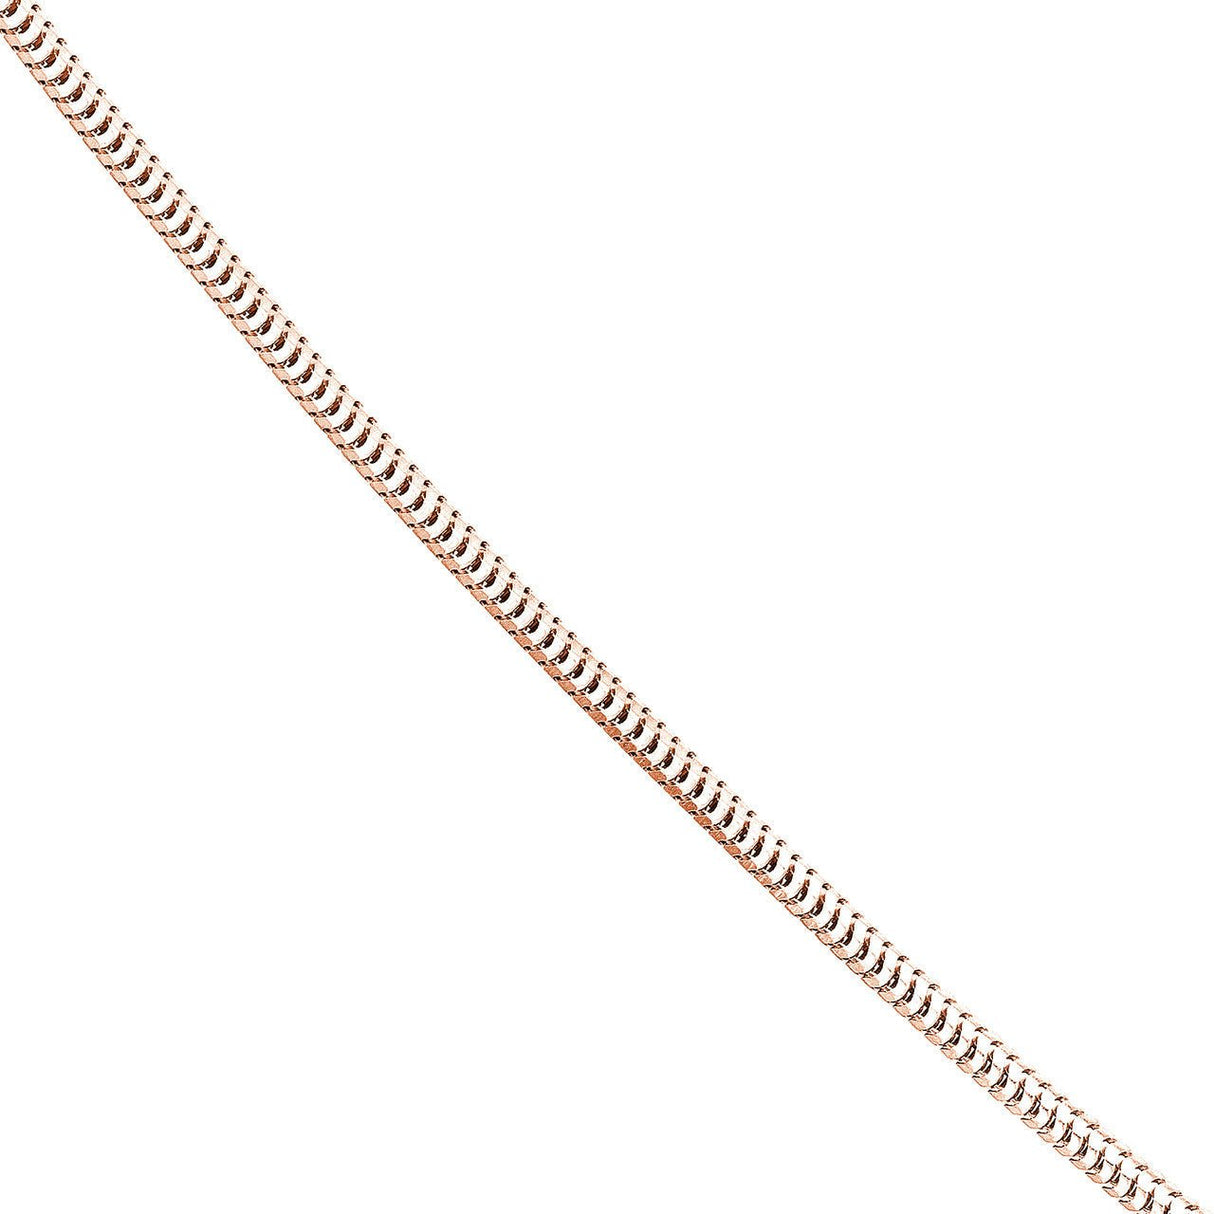 14K Gold Chain, 24", 1.4mm Snake Chain with Lobster Lock,, Gold Layered Chains, Gold Chain Necklace, - Diamond Origin